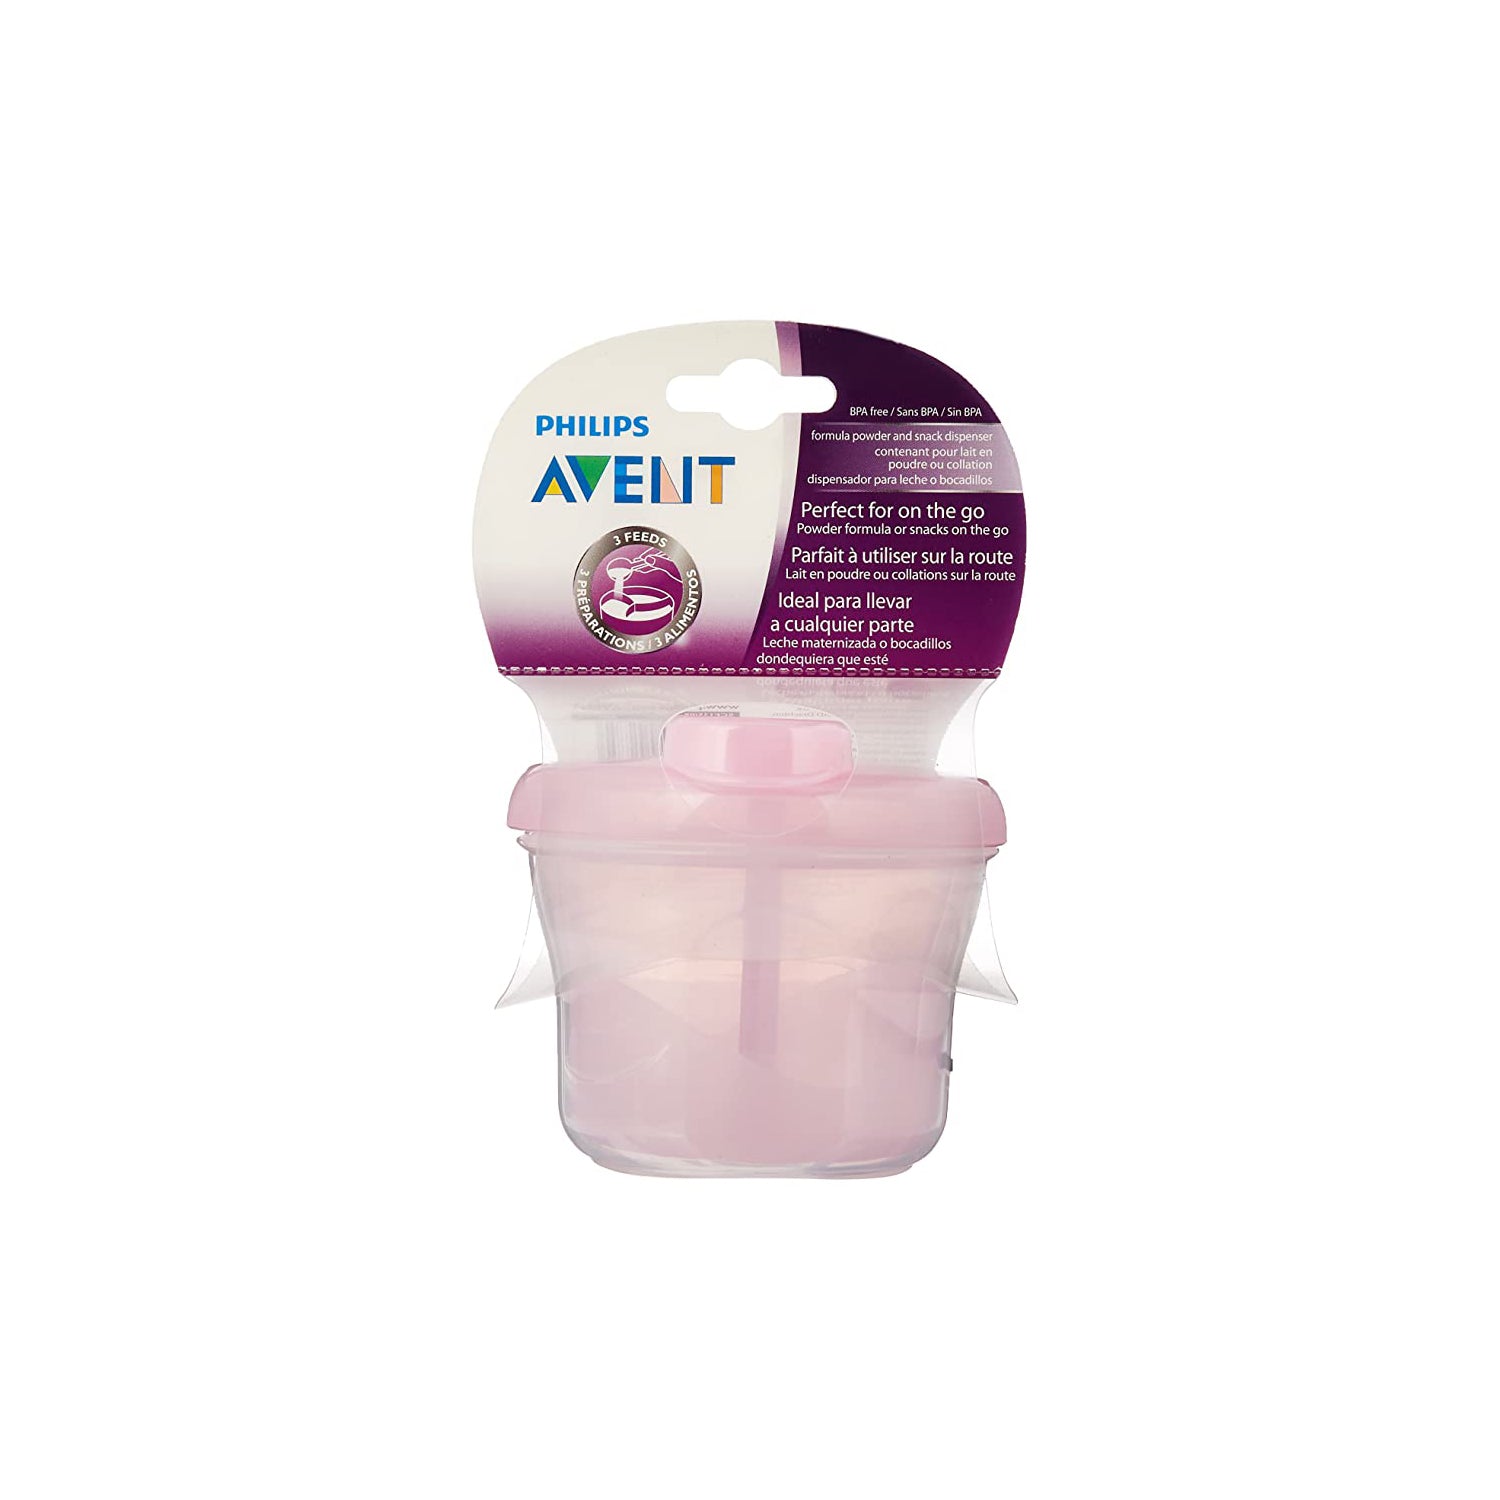 Phillips Avent BPA Free Formula Dispenser/Snack Cup, Colors May Vary